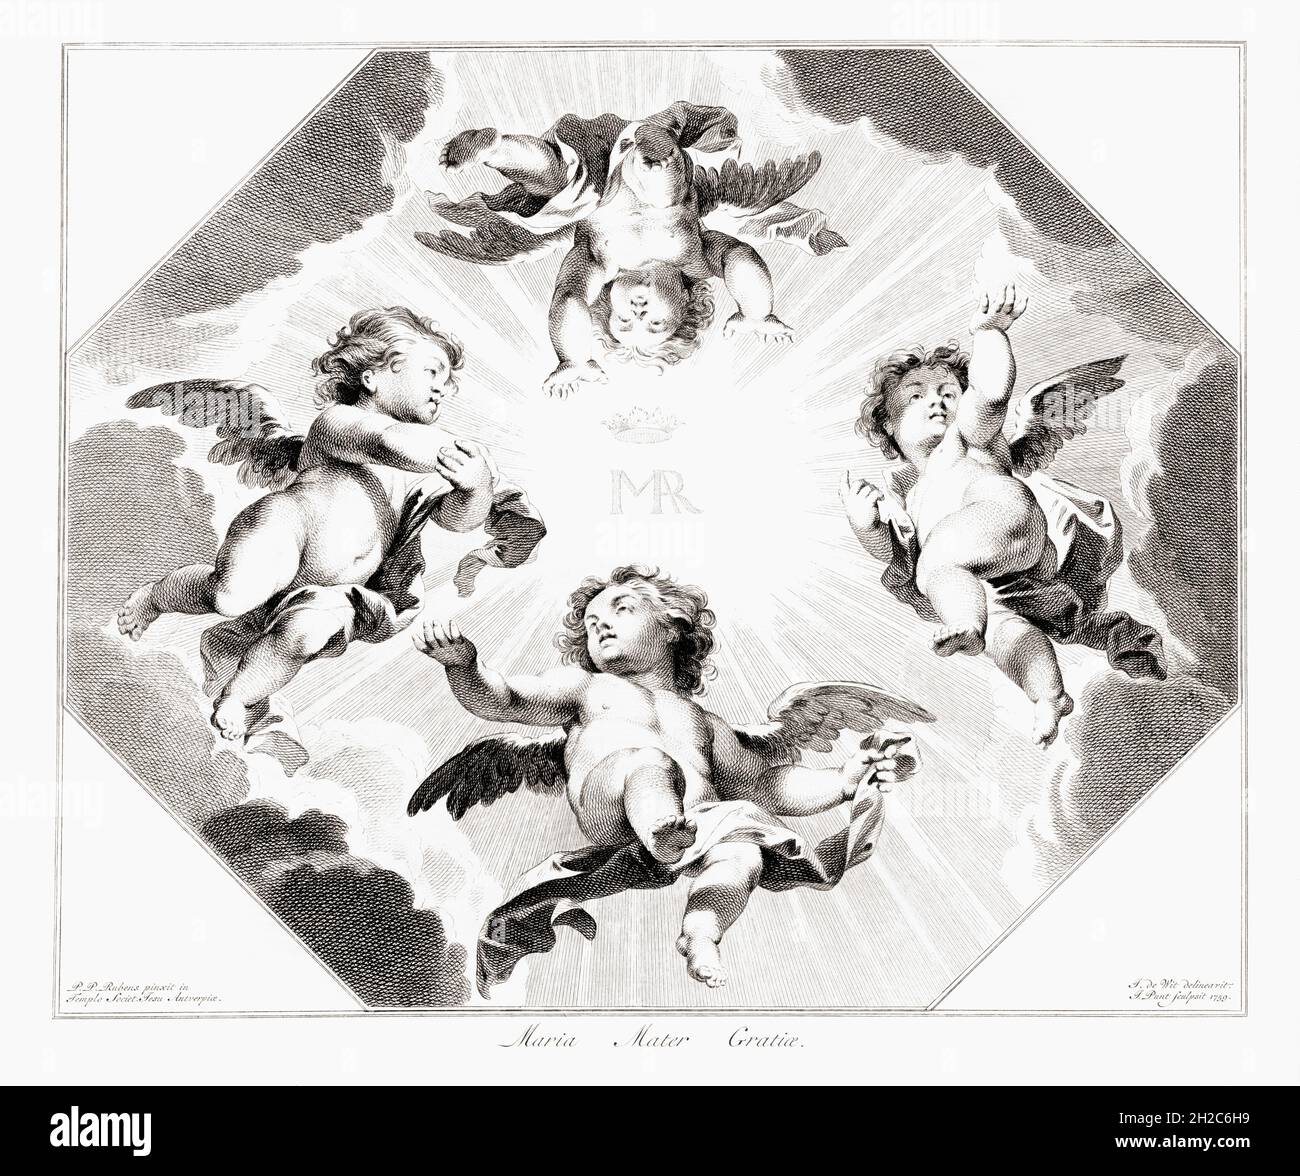 Four child angels celebrating the Virgin Mary.  The latin phrase translates as Mary, mother of grace, which is a Roman Catholic prayer to the mother of Jesus. After an 18th century engraving by Jan Punt from a work by Peter Paul Rubens. Stock Photo